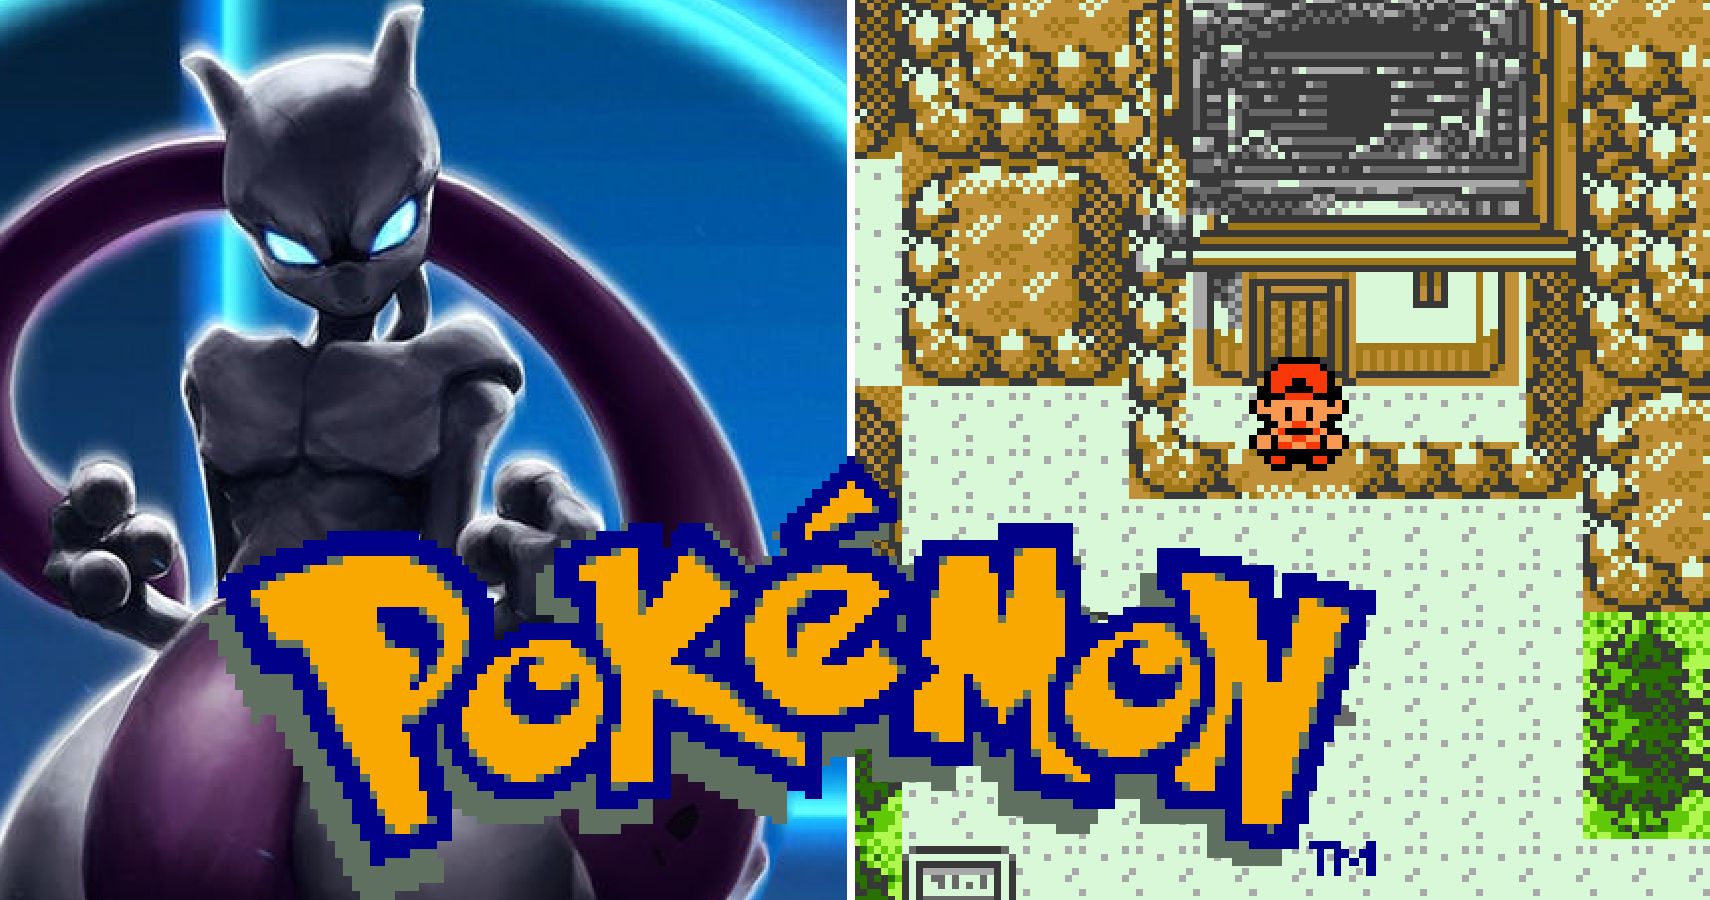 15 Awesome Things You Didn't Know About Pokemon Gold and Silver